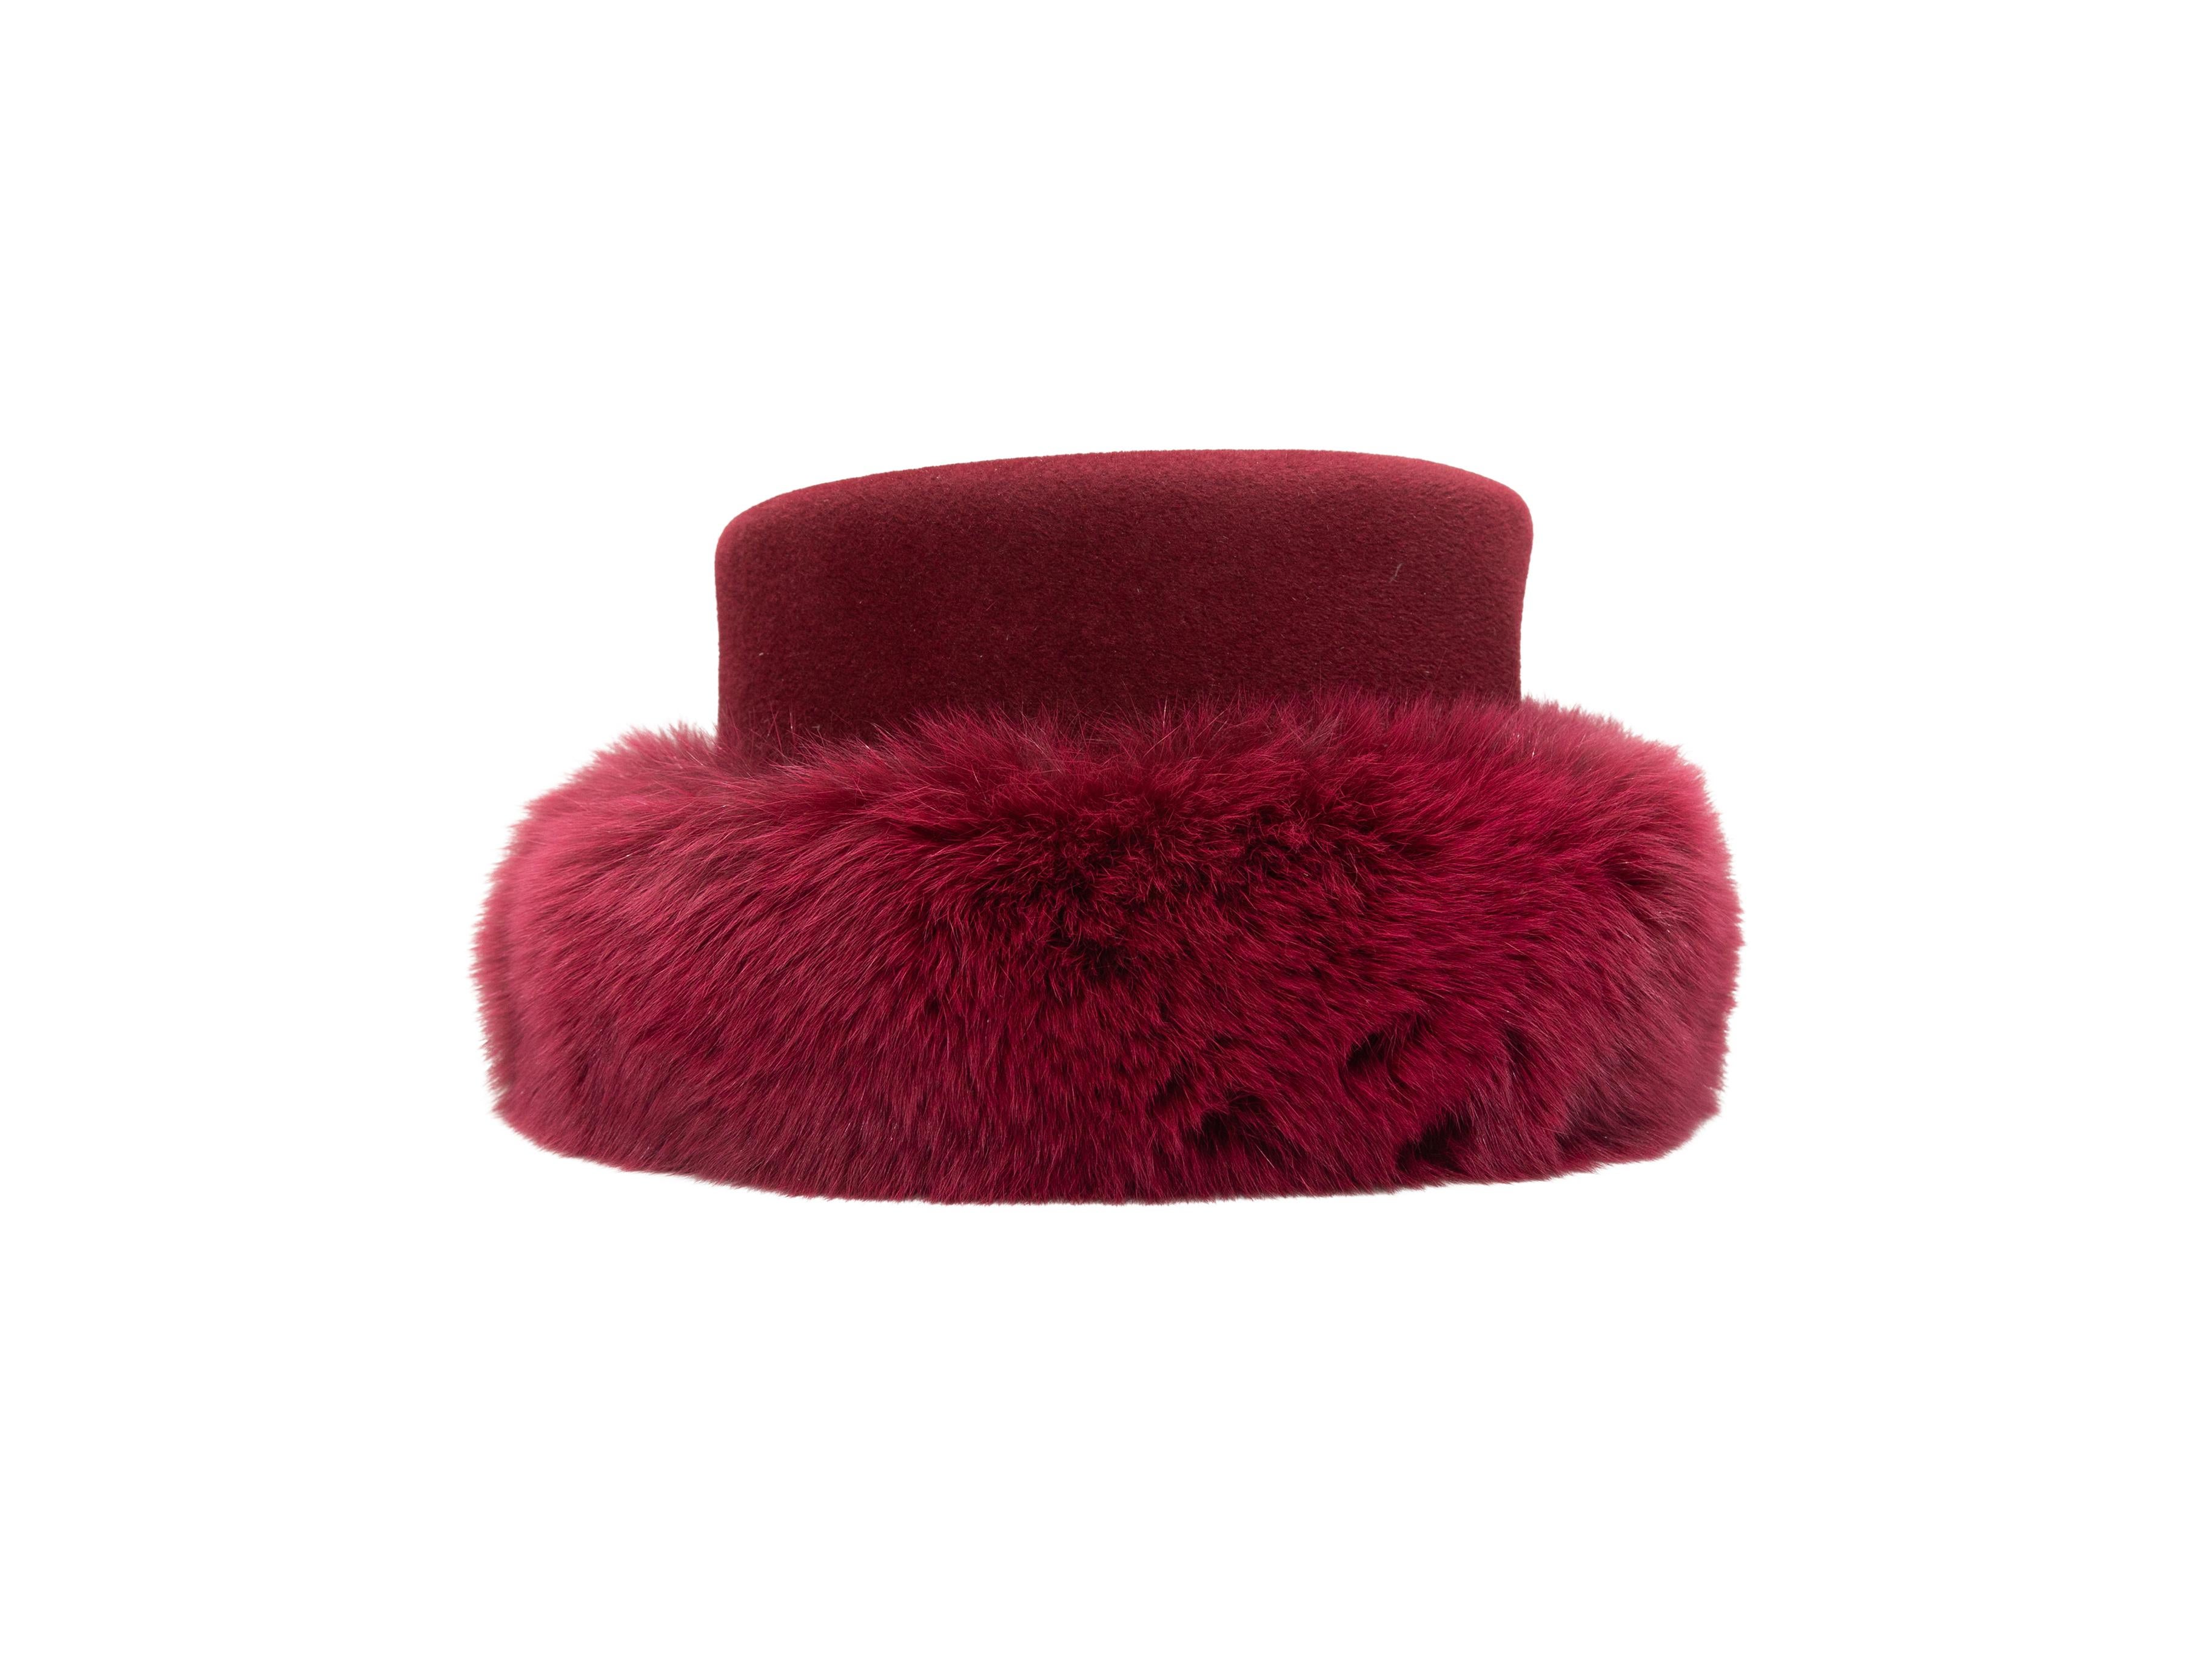 Product Details: Raspberry wool and fur hat by Patricia Underwood. 6